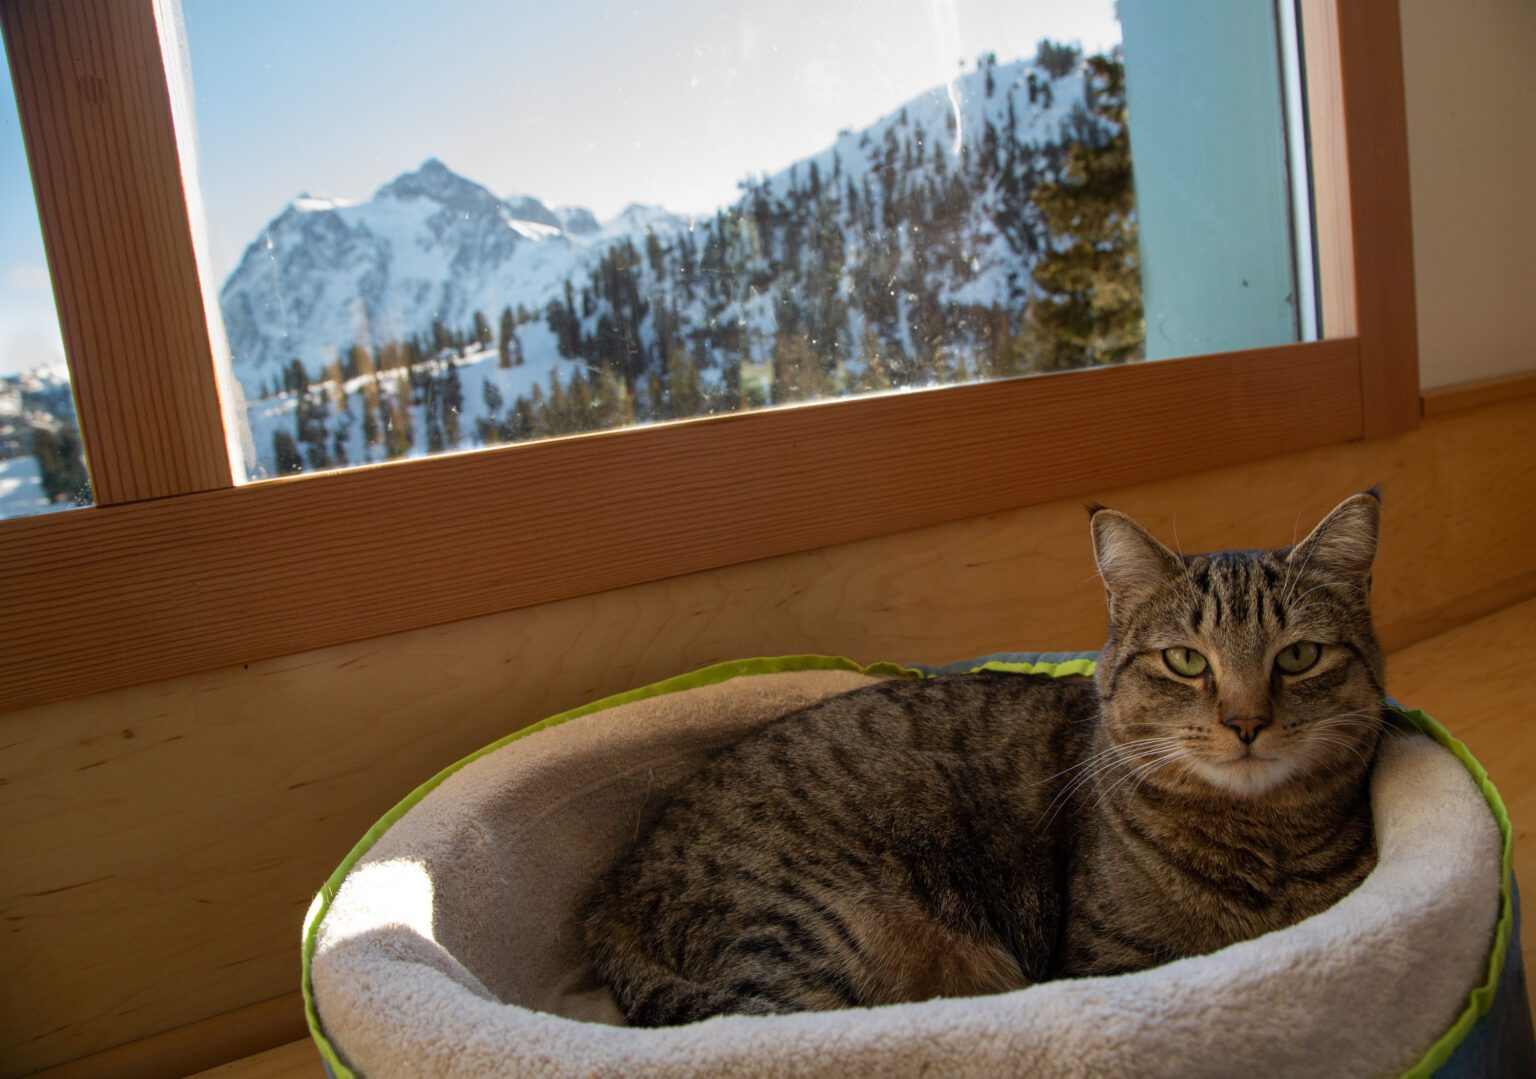 Lodge cat Tillie sits in a window bed at Heather Meadows Lodge at Mount Baker Ski Area on Nov. 18.